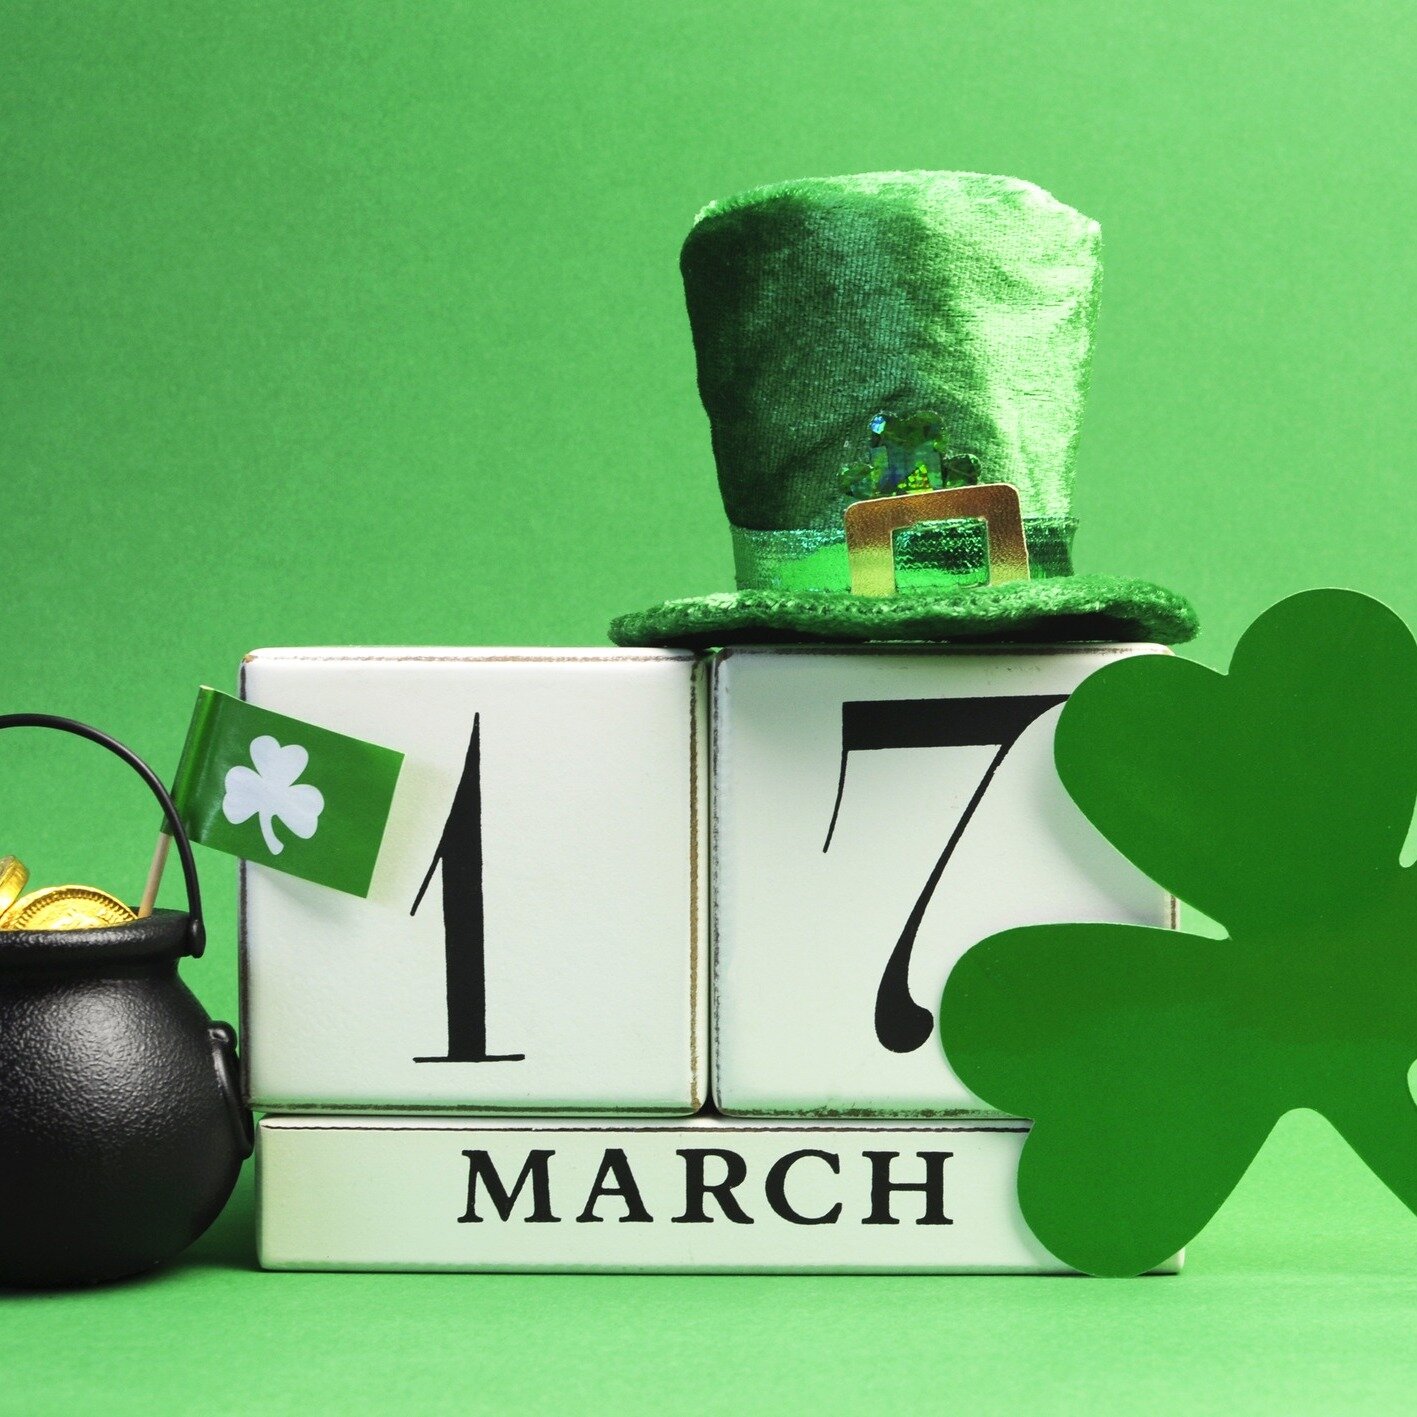 &quot;Whether it's St. Patrick's Day or not, everyone has a little luck o' the Irish in them.&quot;
- Laura Sommers 🍀

#stpatricksday #luck